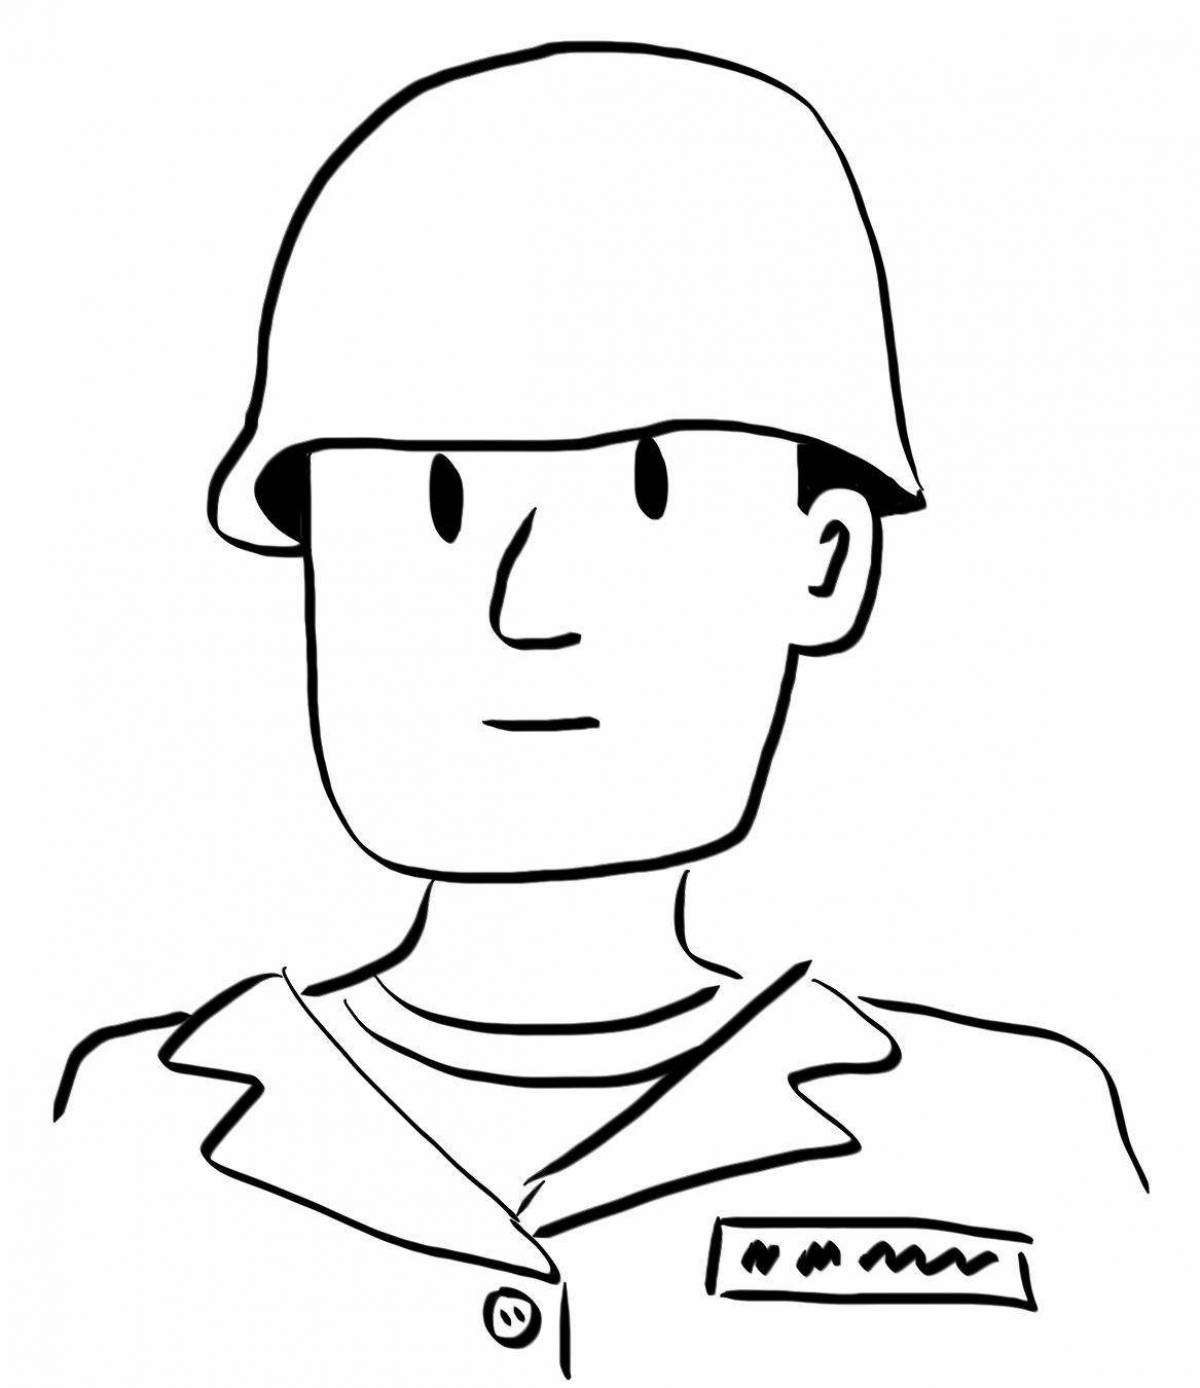 Royal soldier coloring page